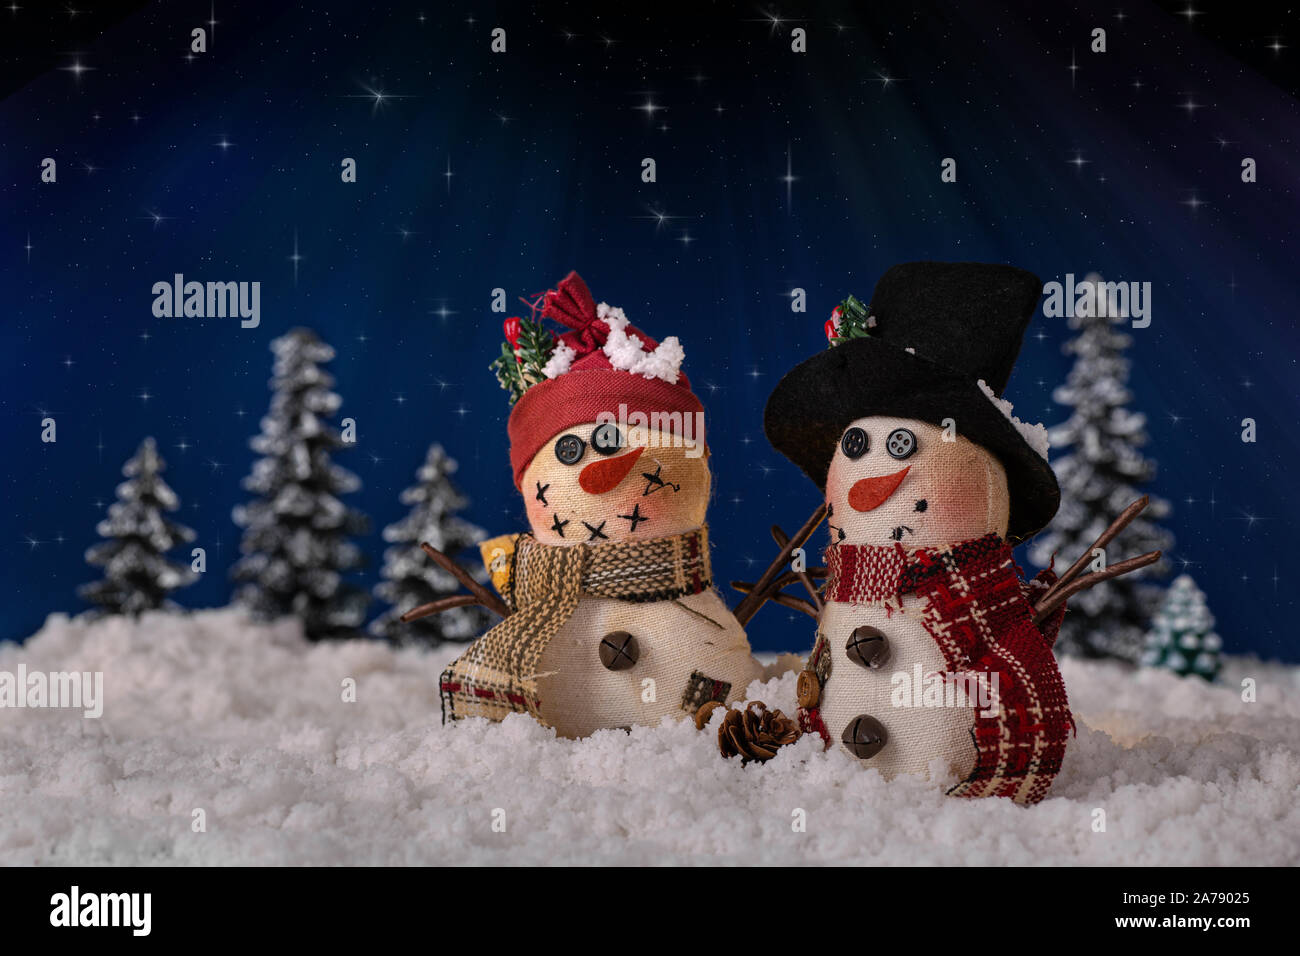 Holiday snowmen figurines on snowy surface against a night sky background with shining stars Stock Photo